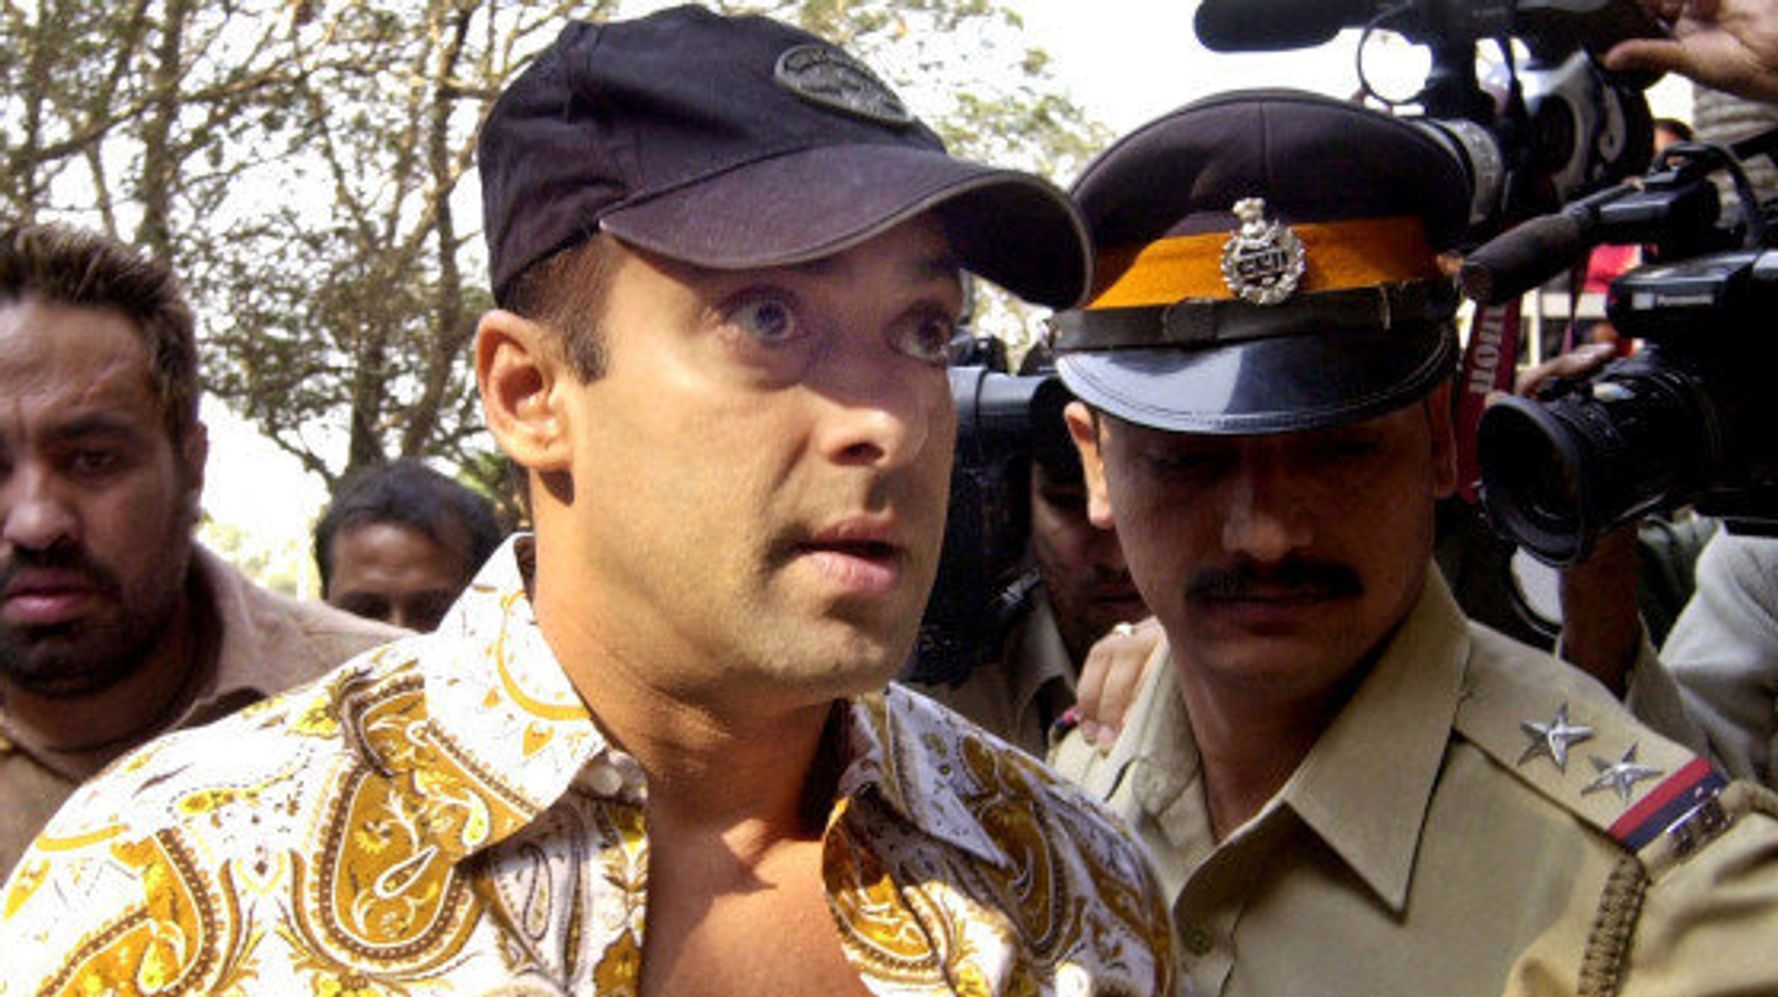 celebrities who committed crimes - Indian superstar Salman Khan has hit and run charges, killed endangered animals and has ruined the career of his ex girlfriend's new boyfriend.